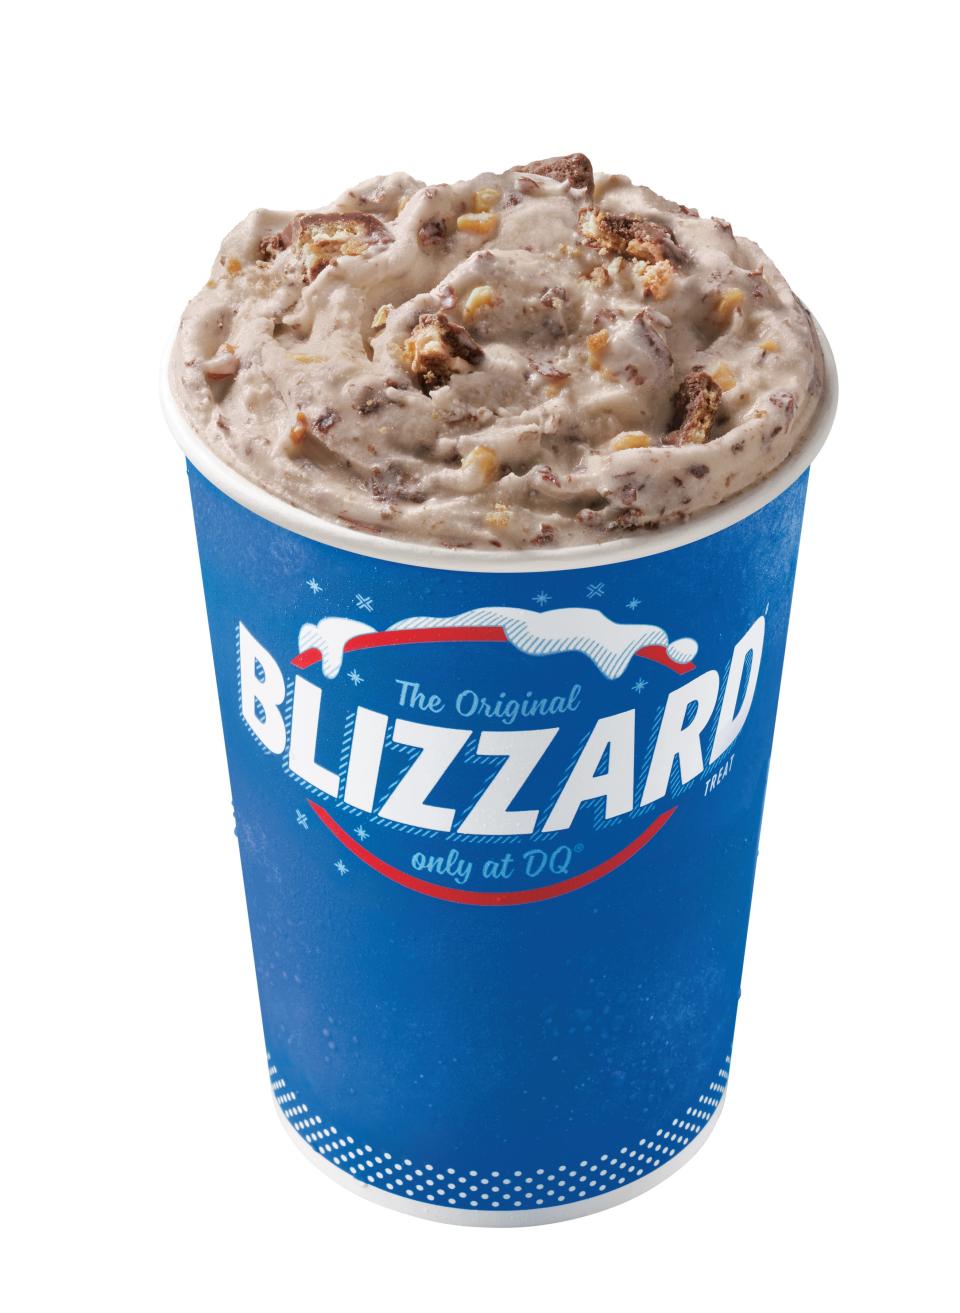 The Blizzard is among the best-known treats on the Dairy Queen menu.